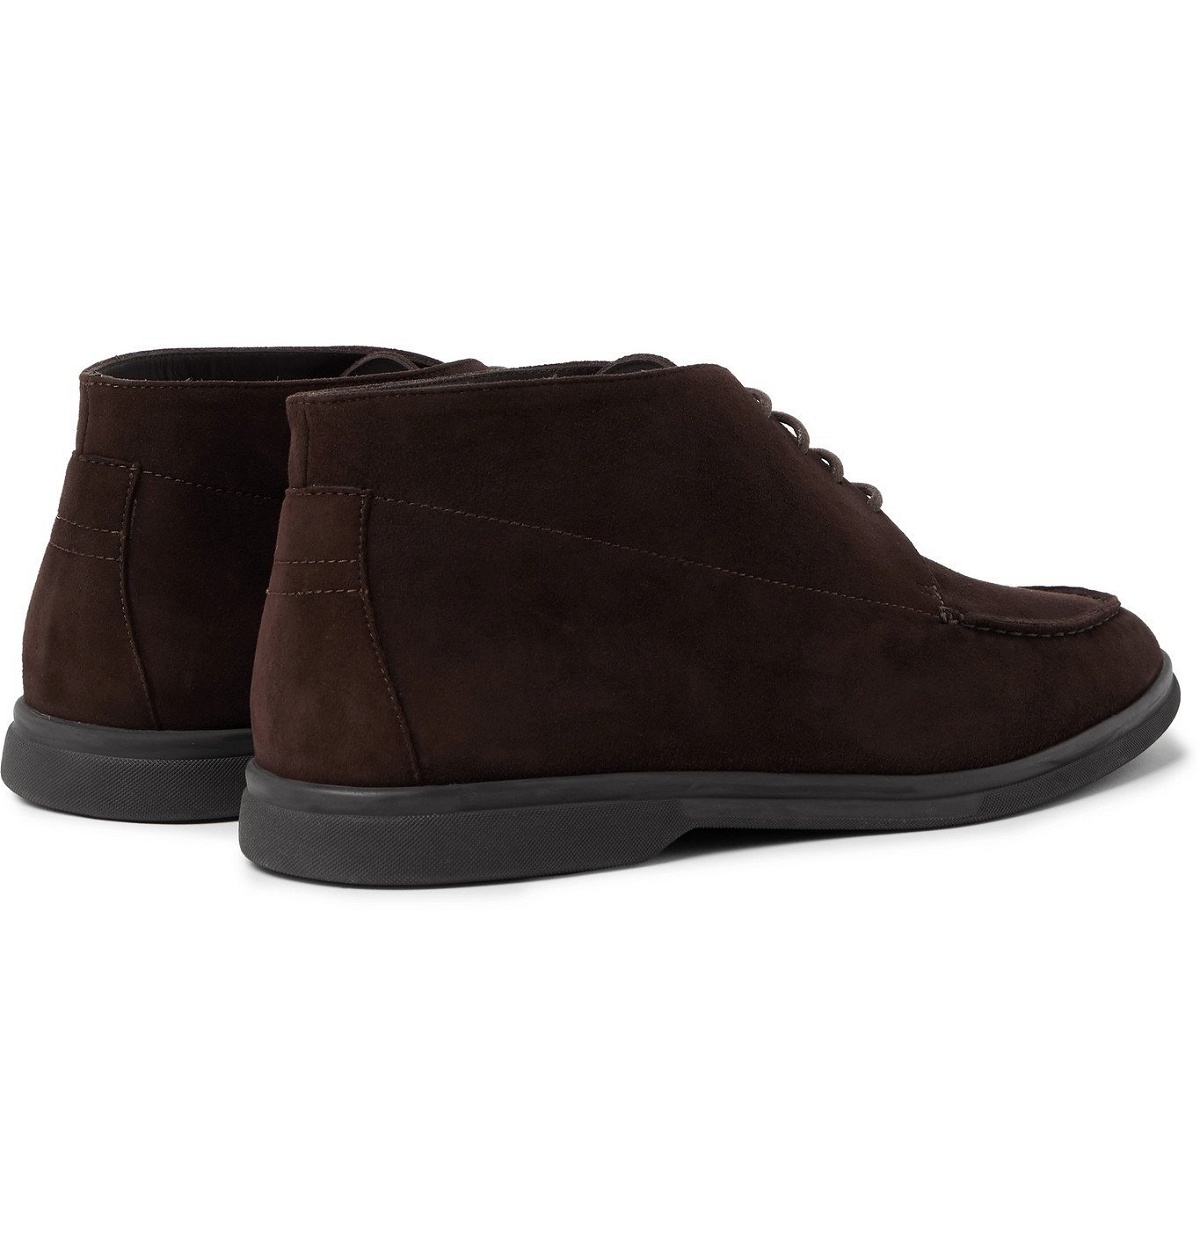 Canali - Suede Desert Boots - Brown Canali